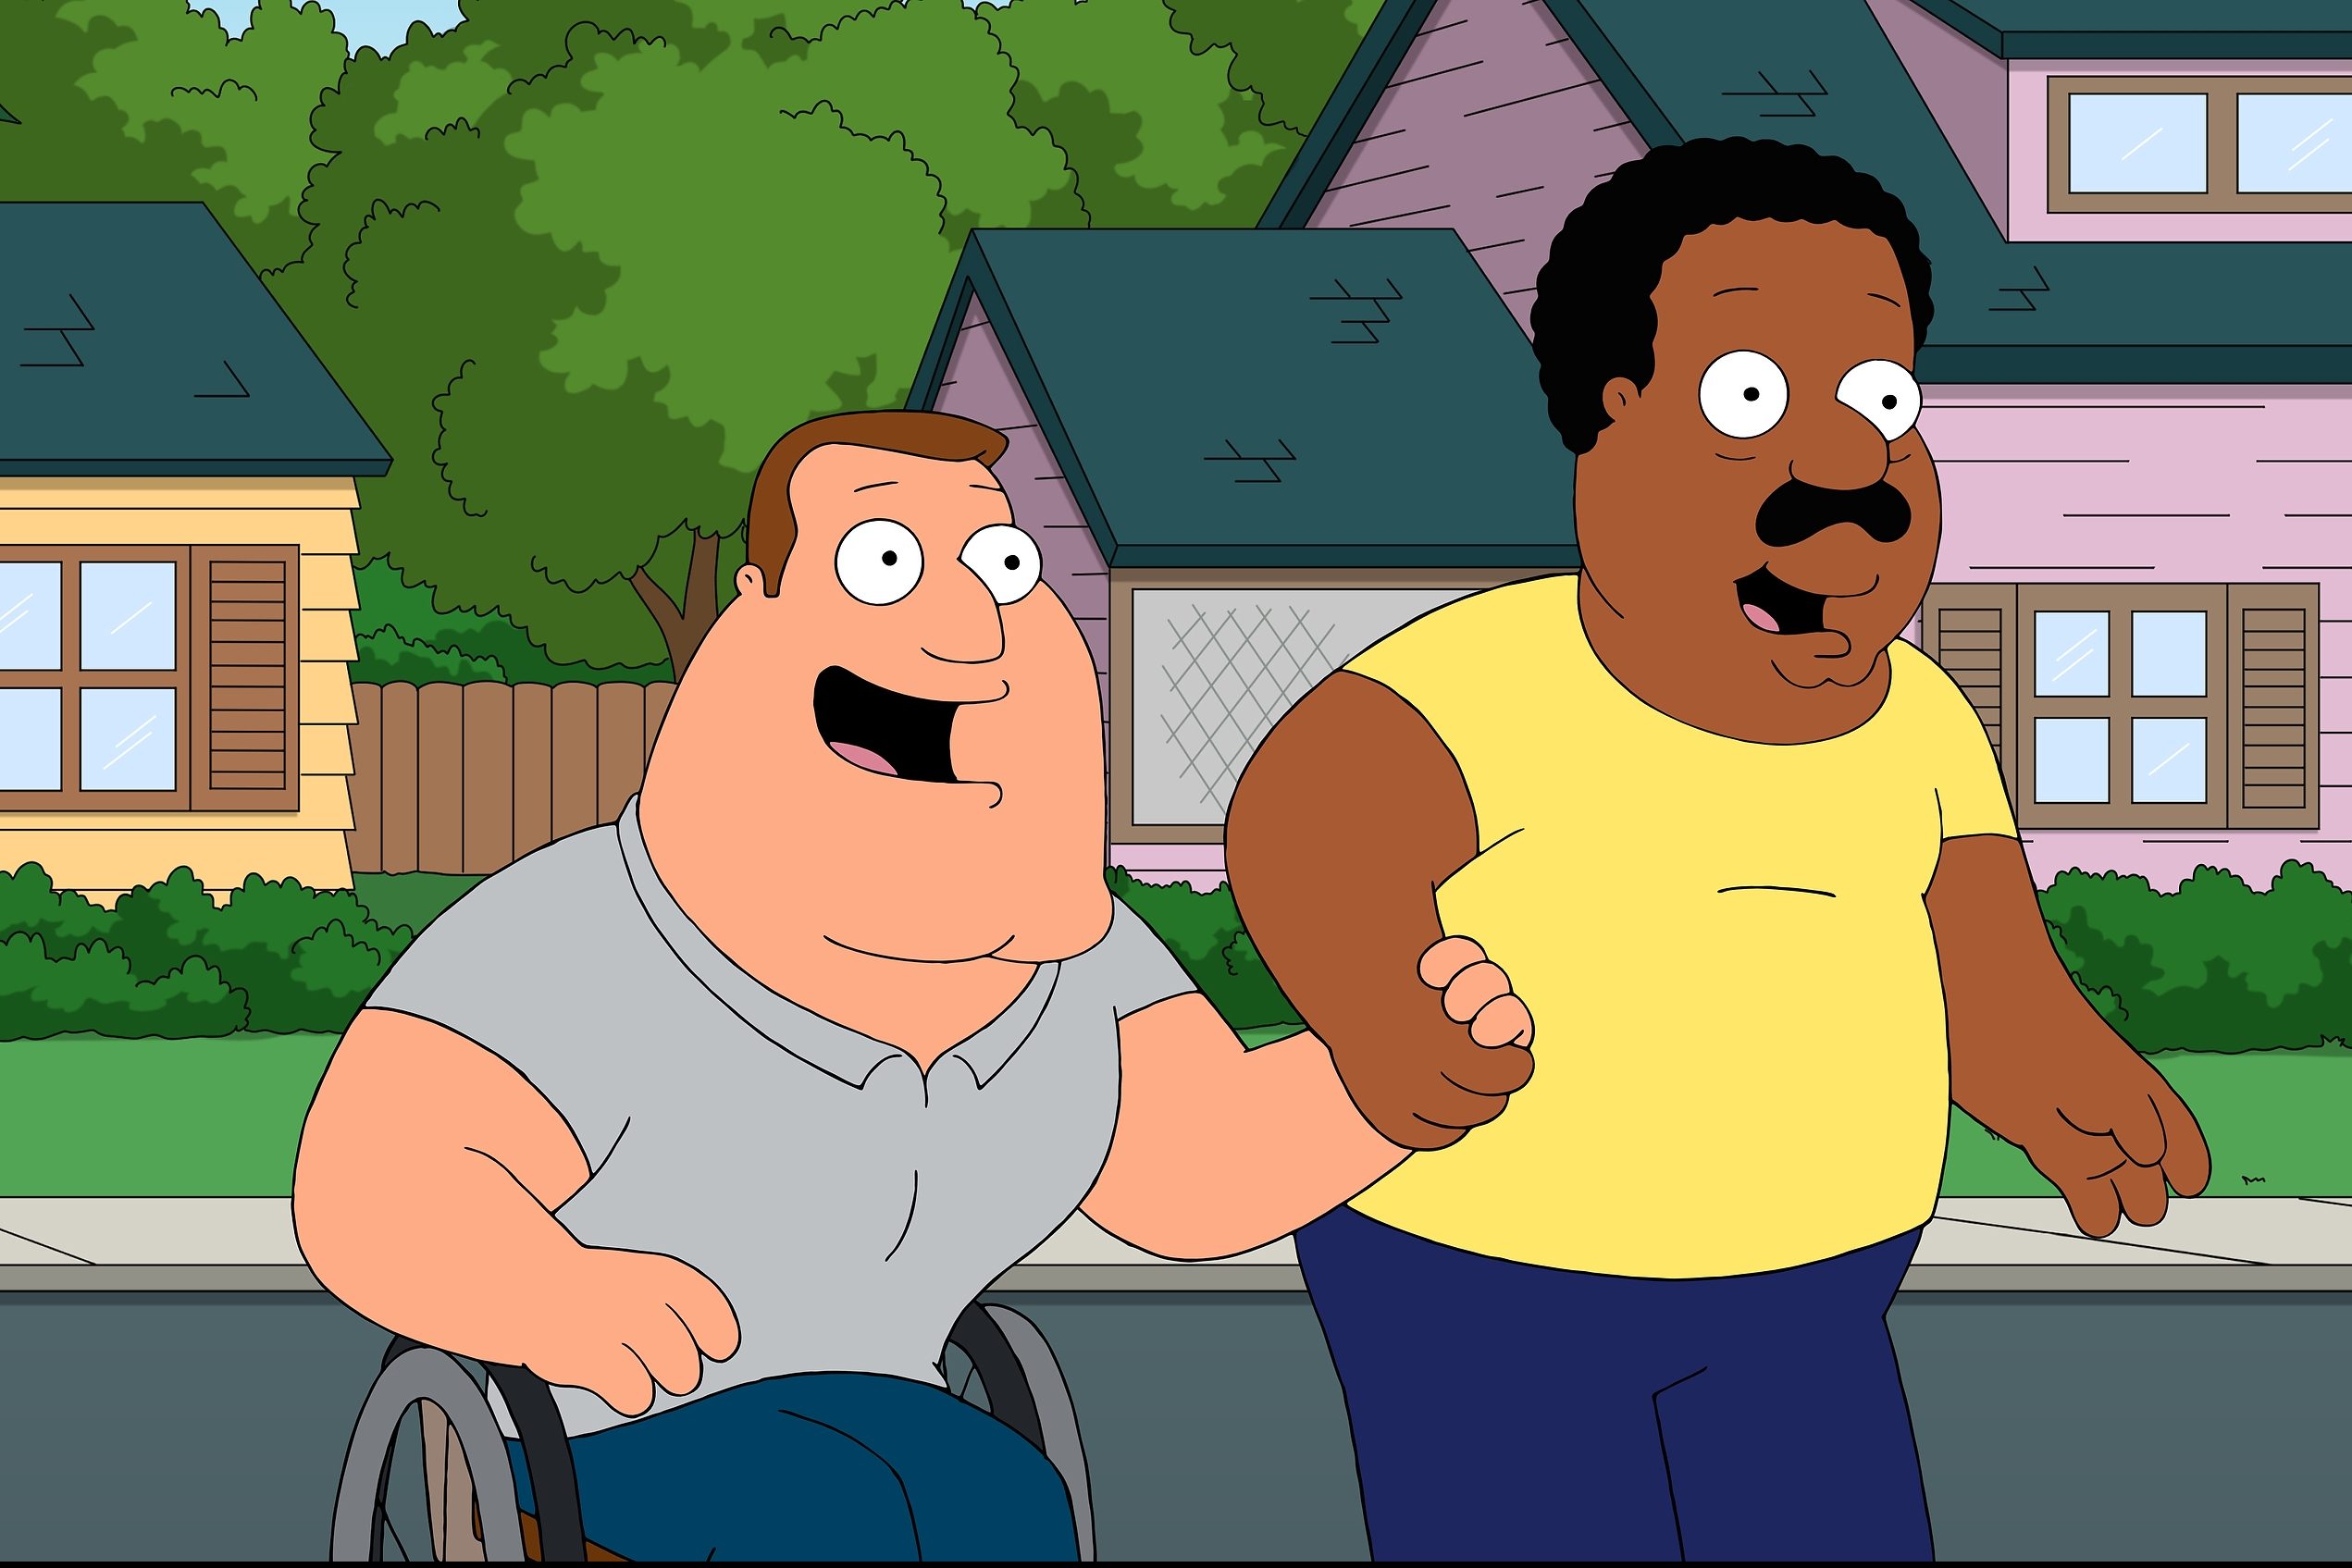 Family Guy' voice actor Mike Henry says he is 'stepping down' from